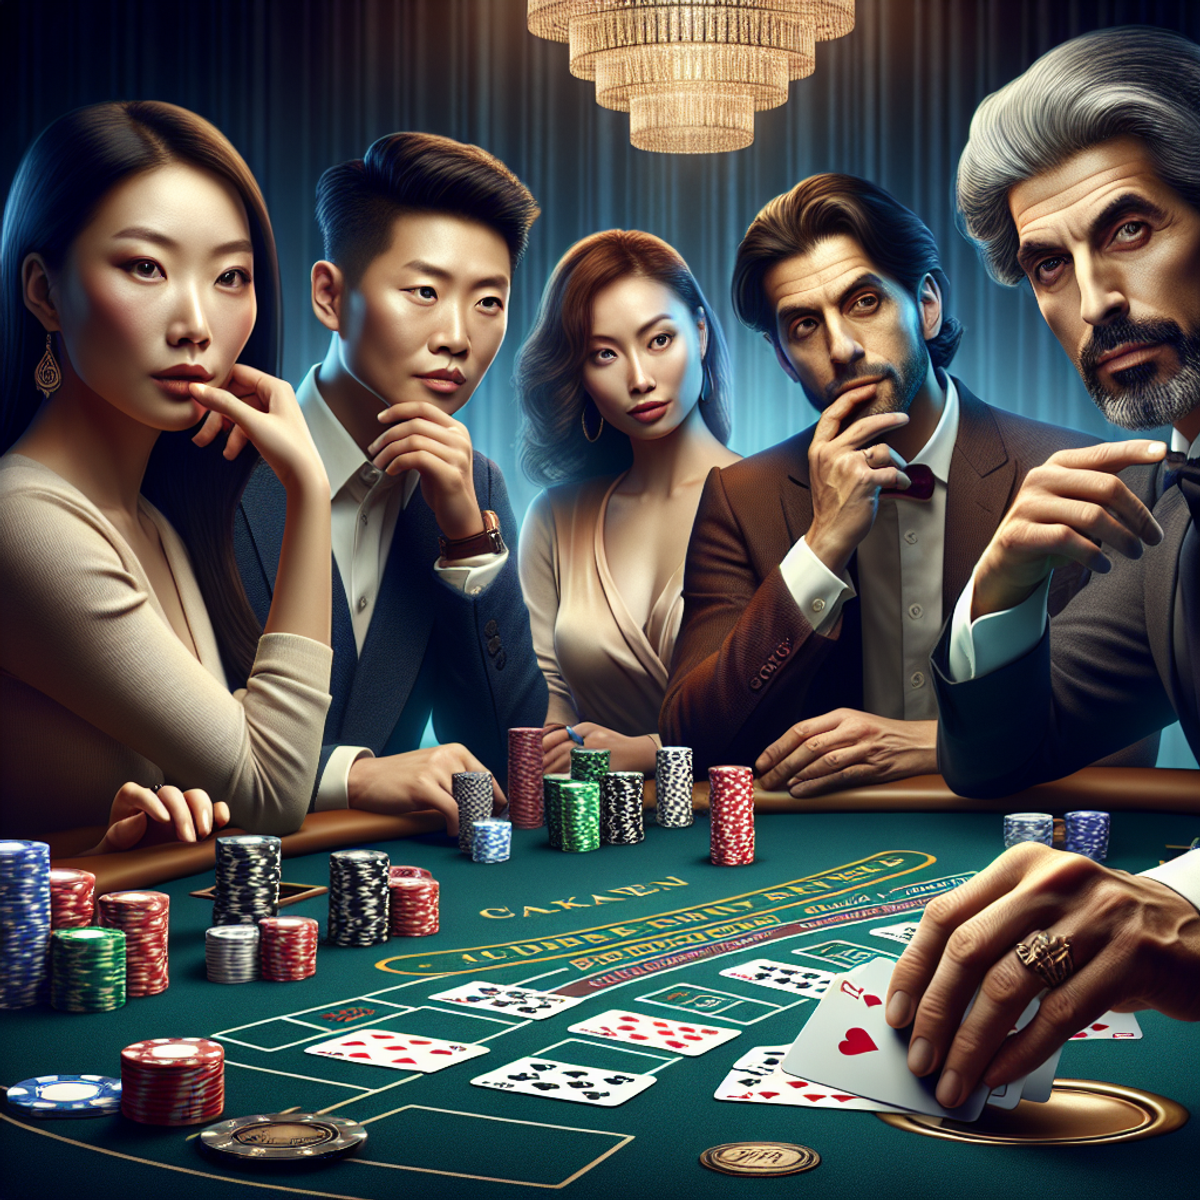 A diverse group of people playing blackjack at a casino table, with a confident Asian male dealer dealing cards and players showing various emotions.